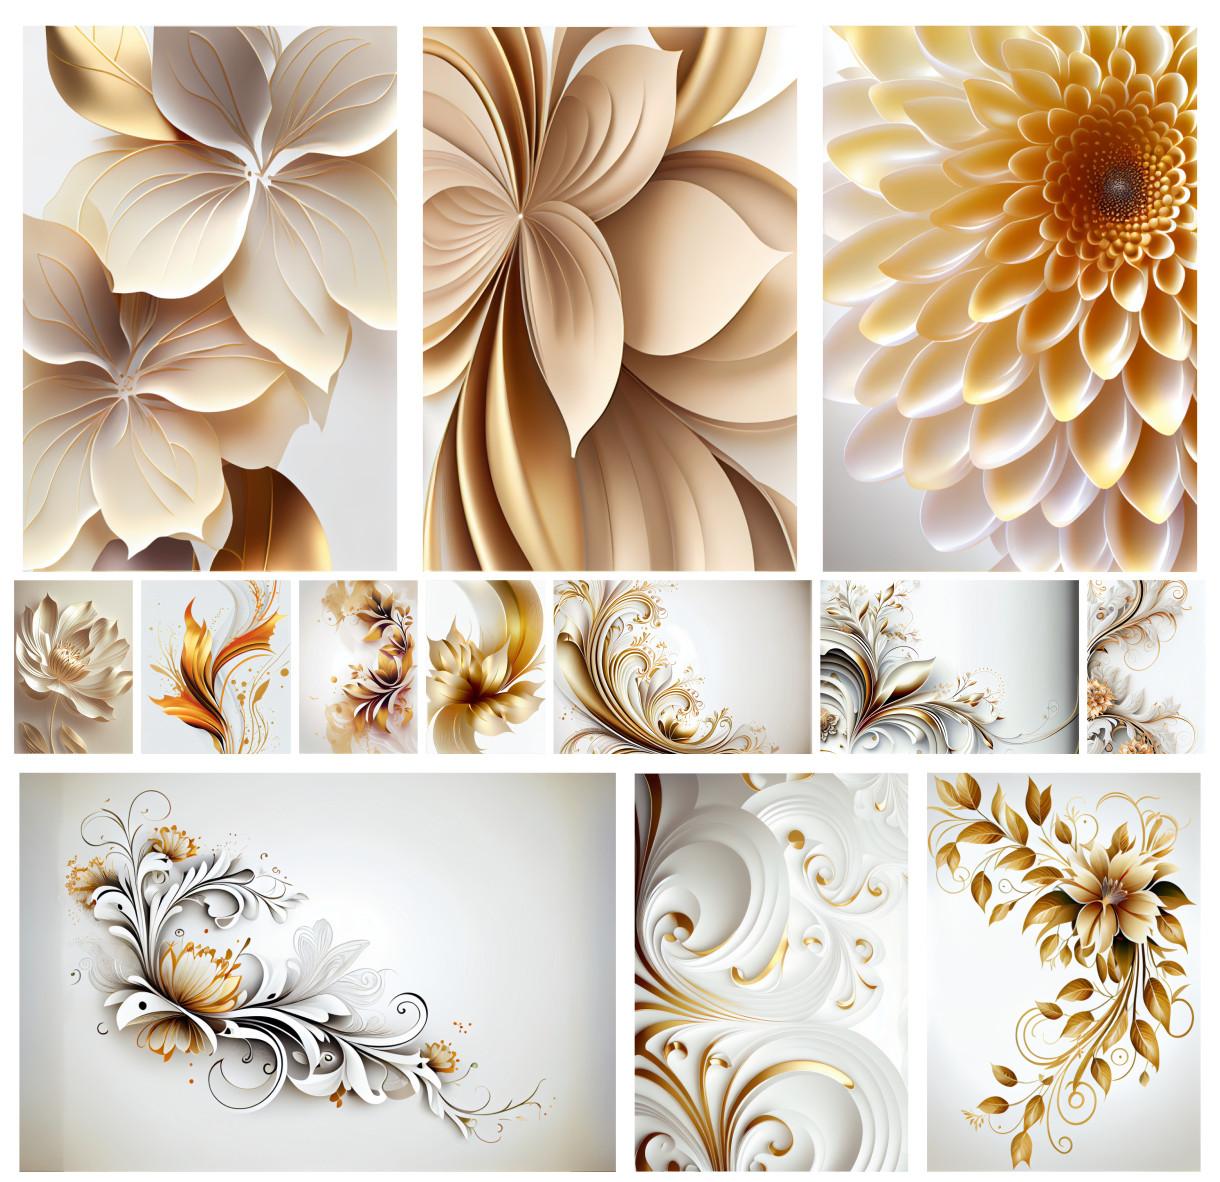 Gilded Elegance: 13 Free Gold Flower Backgrounds for Your Creative Projects